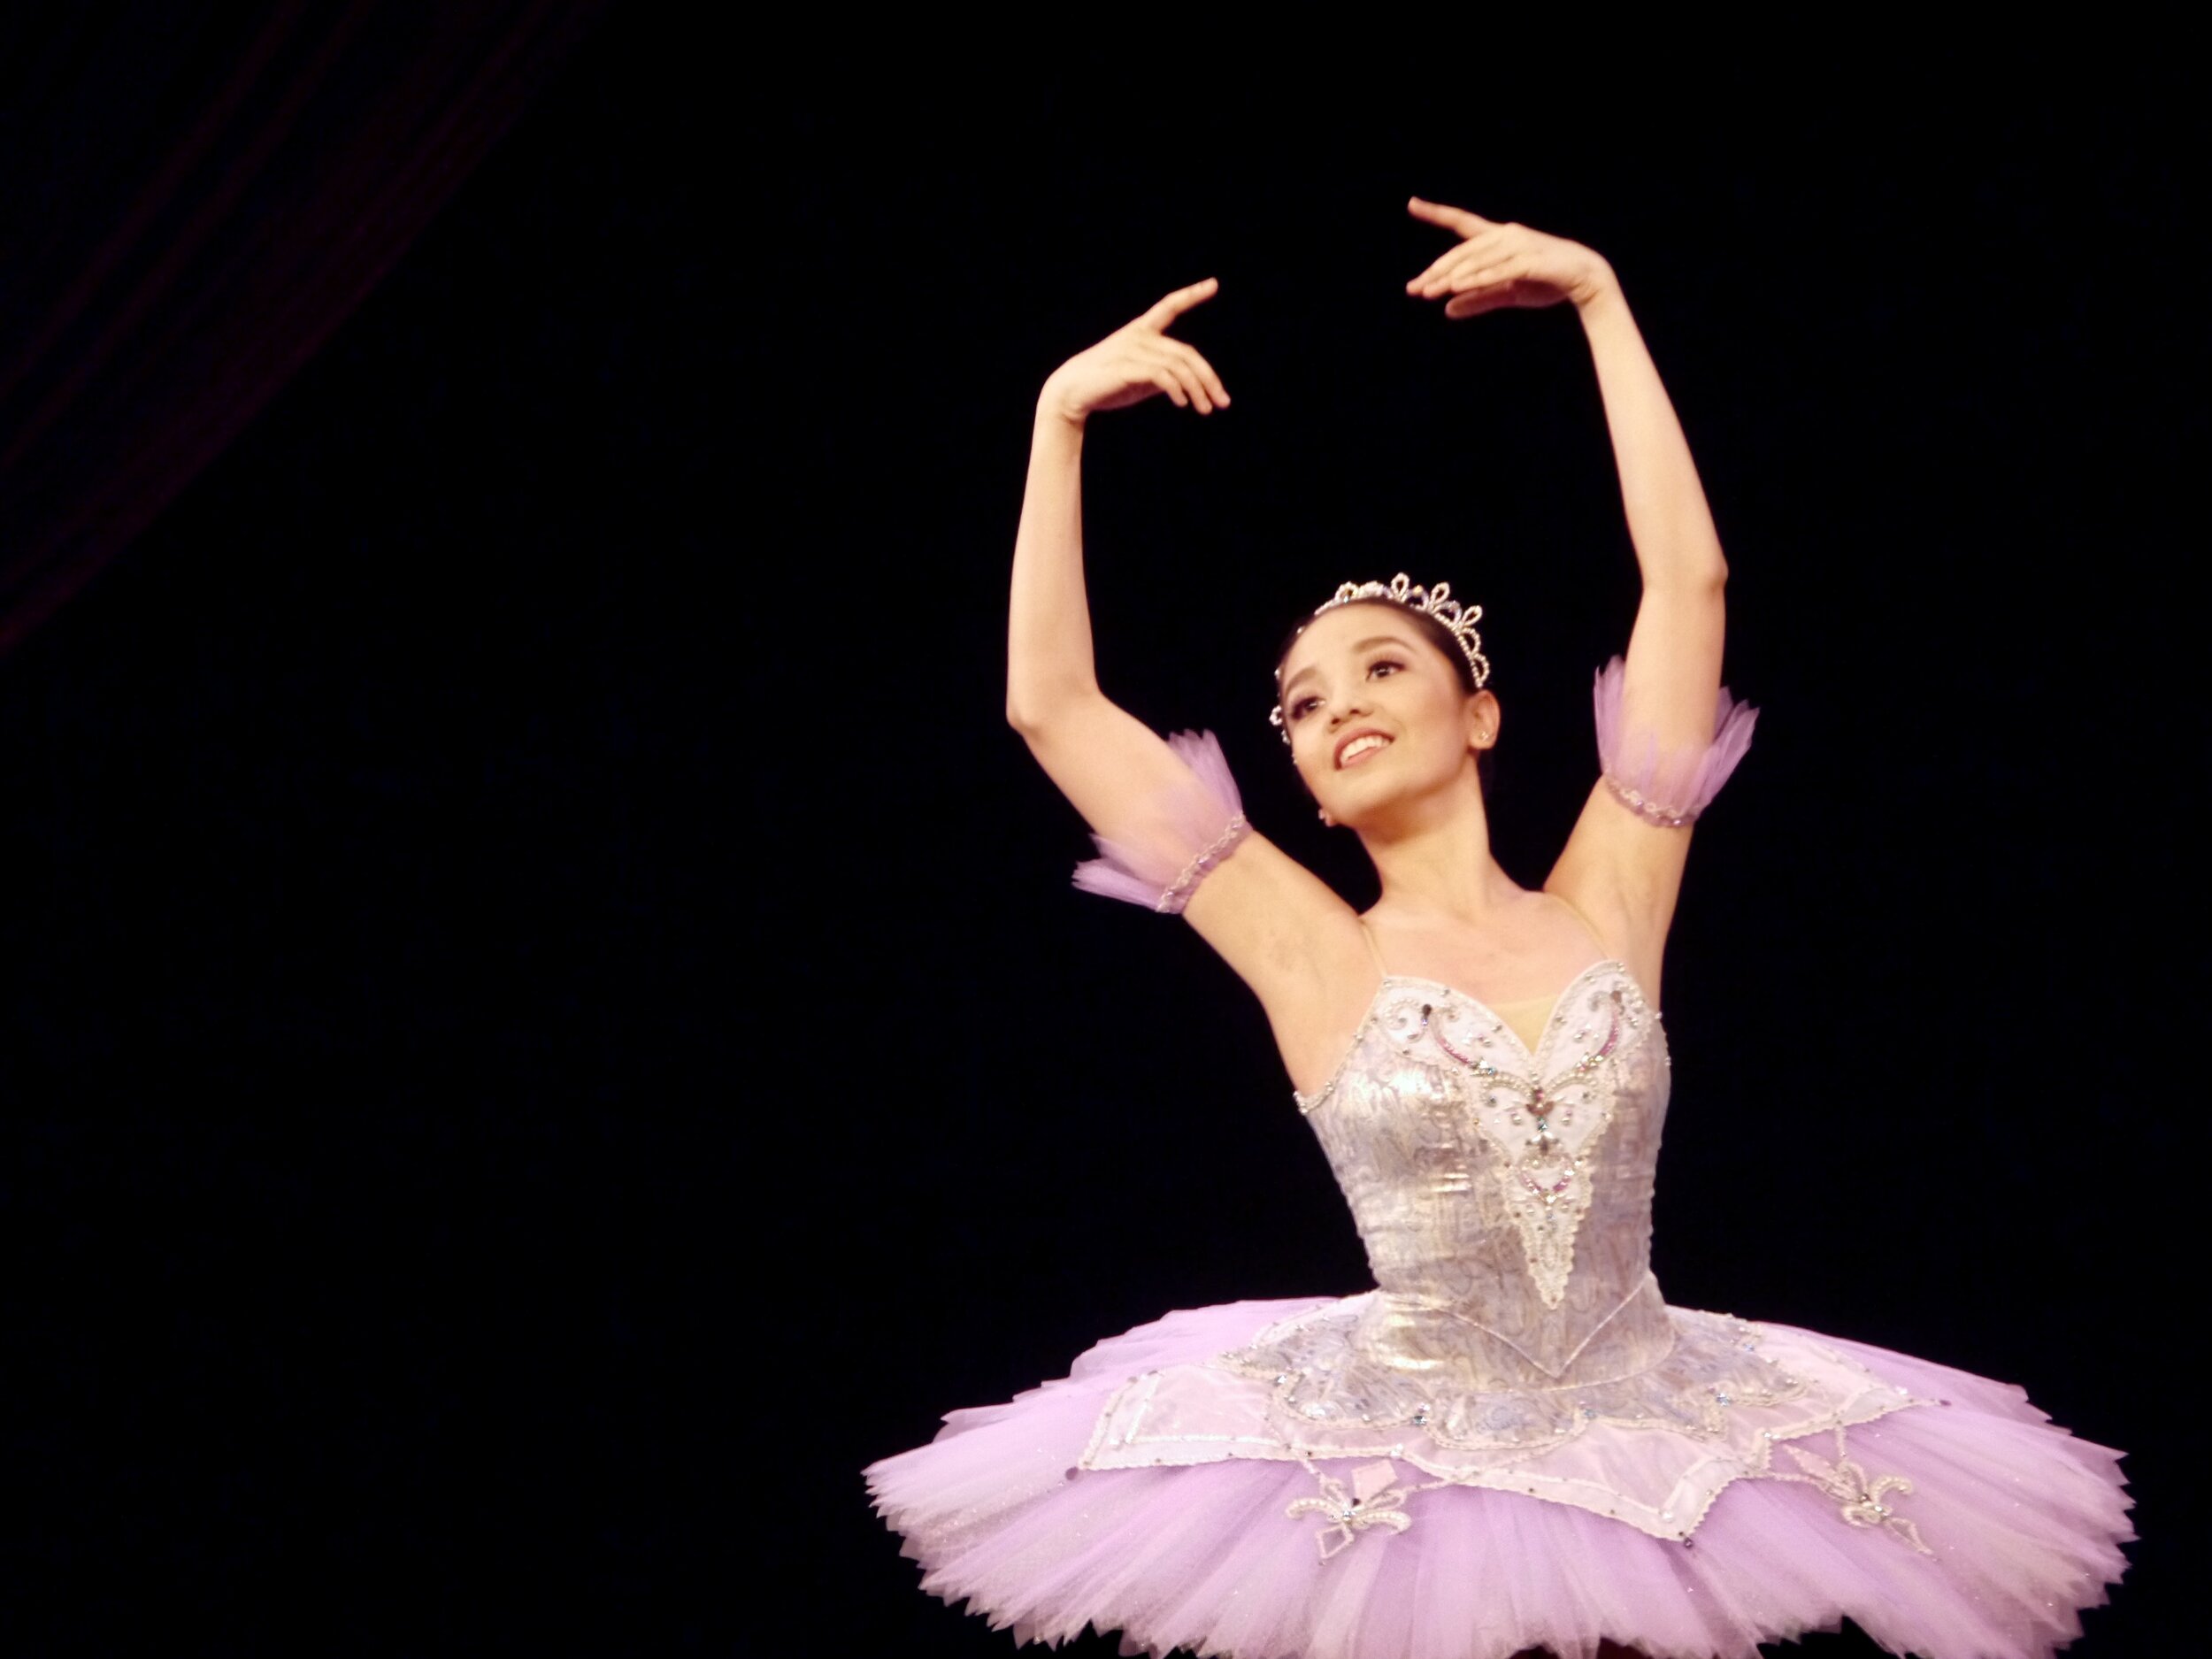    Touches of lavender lend a delicate feel to Marinette Franco’s interpretation of the  Dream Variation  from  Raymonda  in  Flight  (2017). The show was a preview of Ballet Manila’s competition pieces in that year’s Asian Grand Prix in Hong Kong. P